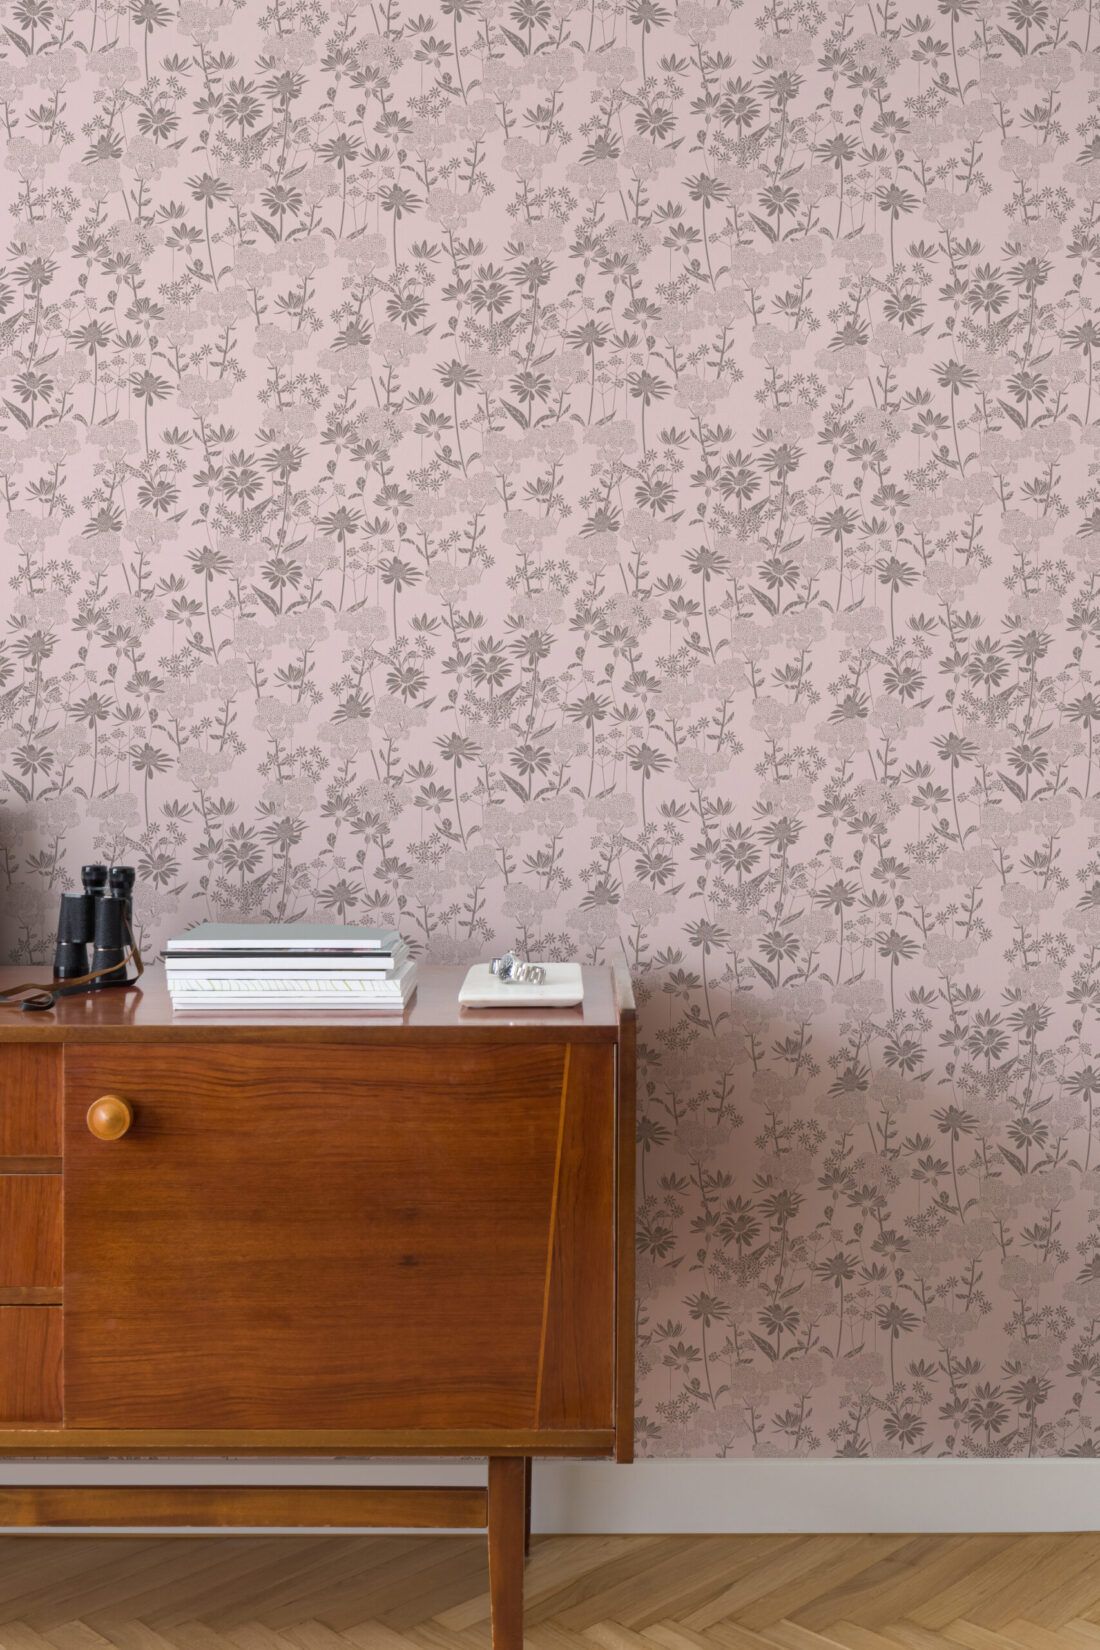 In The Bloom Collection - Wallpaper Republic - London Street Flowers Wallpaper - Colorway: Muted Pink - Insitu